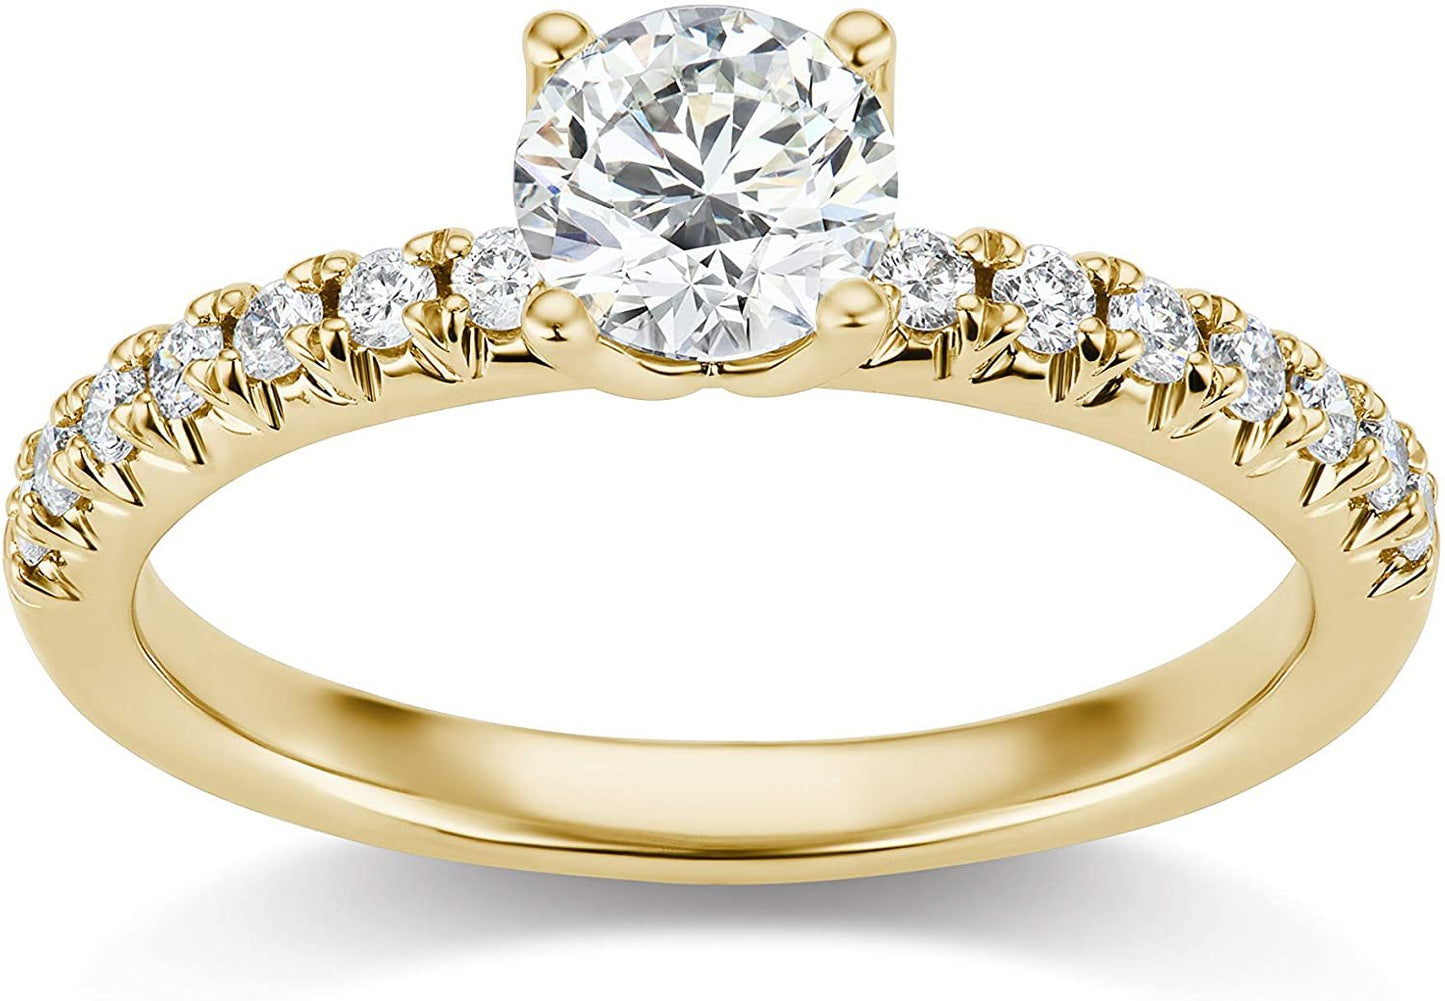 IGI Certified 14K Yellow Gold 1-1/4 Cttw Round Brilliant-Cut Lab Created Diamond Solitaire Engagement Ring with Pavé-Set Band (1.0 Carat Center Stone: G-H Color, VS1-VS2 Clarity) - Size 7.25